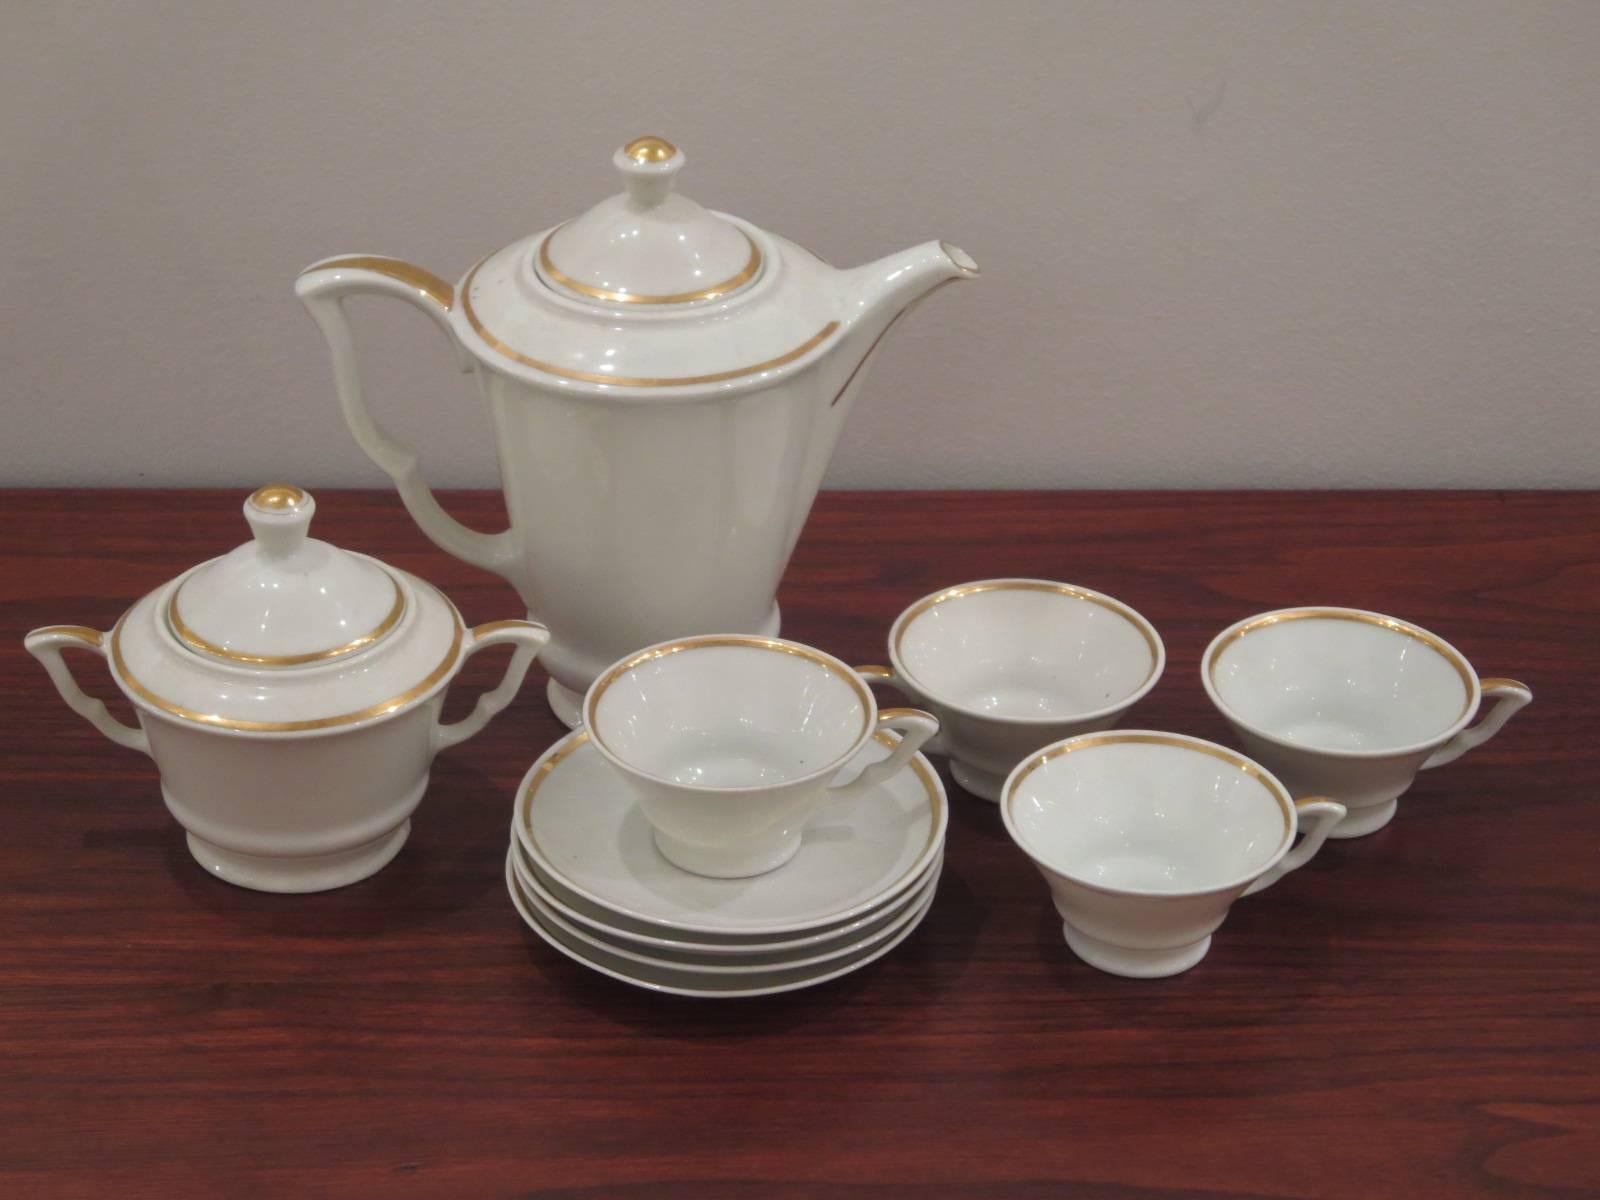 Espresso coffee set for four: Four cups and saucers, coffee pot and sugar bowl in excellent vintage condition.
Coffee pot:7 H x 7 W x 4.5 D.
Sugar bowl: 5 H x 4 W x 3.5 D.